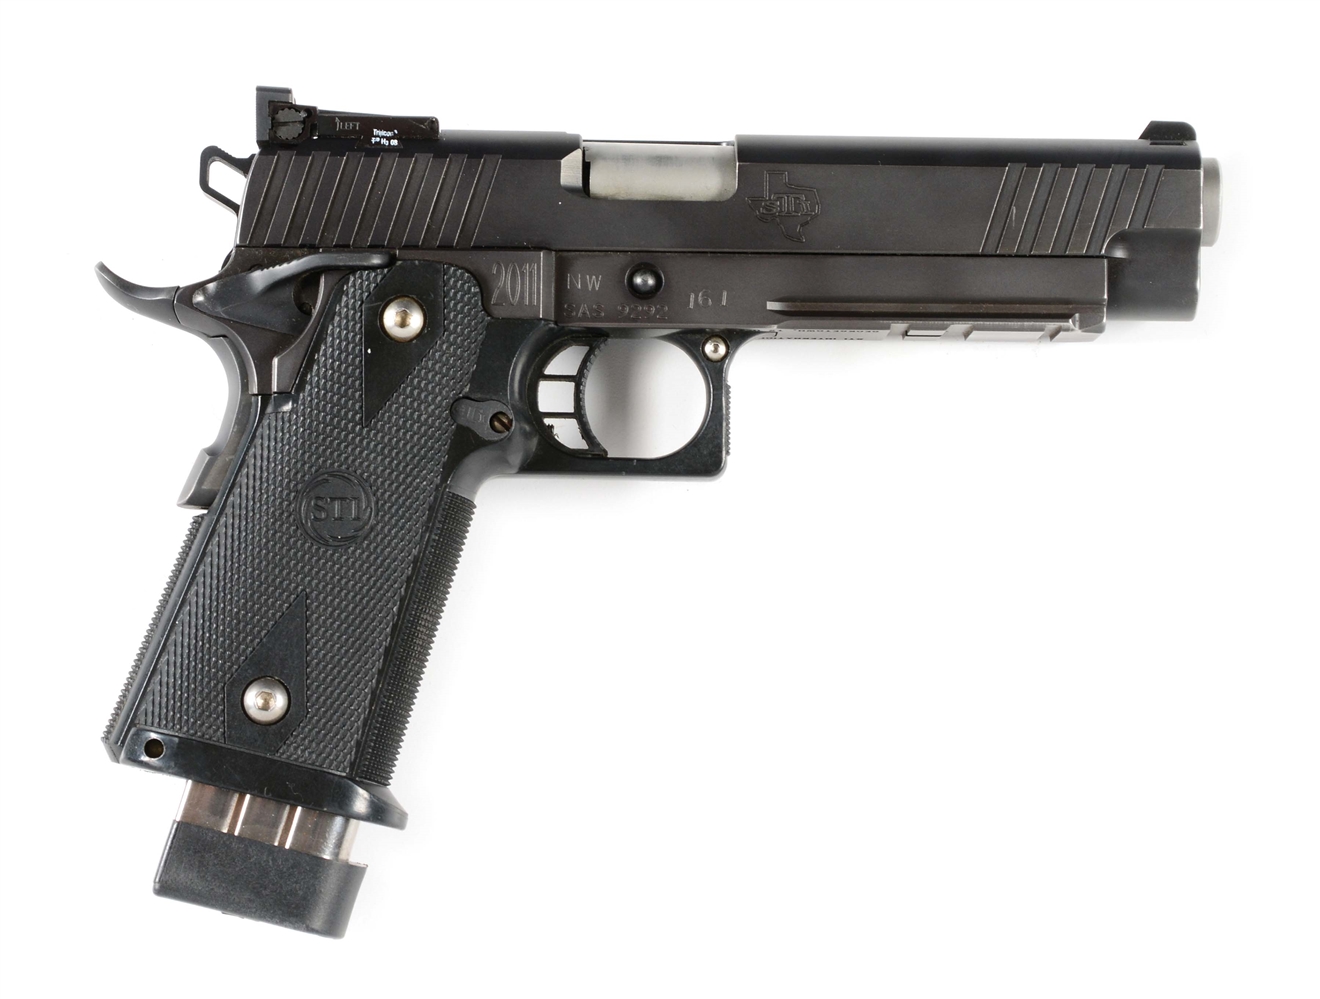 (M) STI TACTICAL .40 S&W SEMI-AUTOMATIC PISTOL FROM THE DELTA FORCE TRIALS.